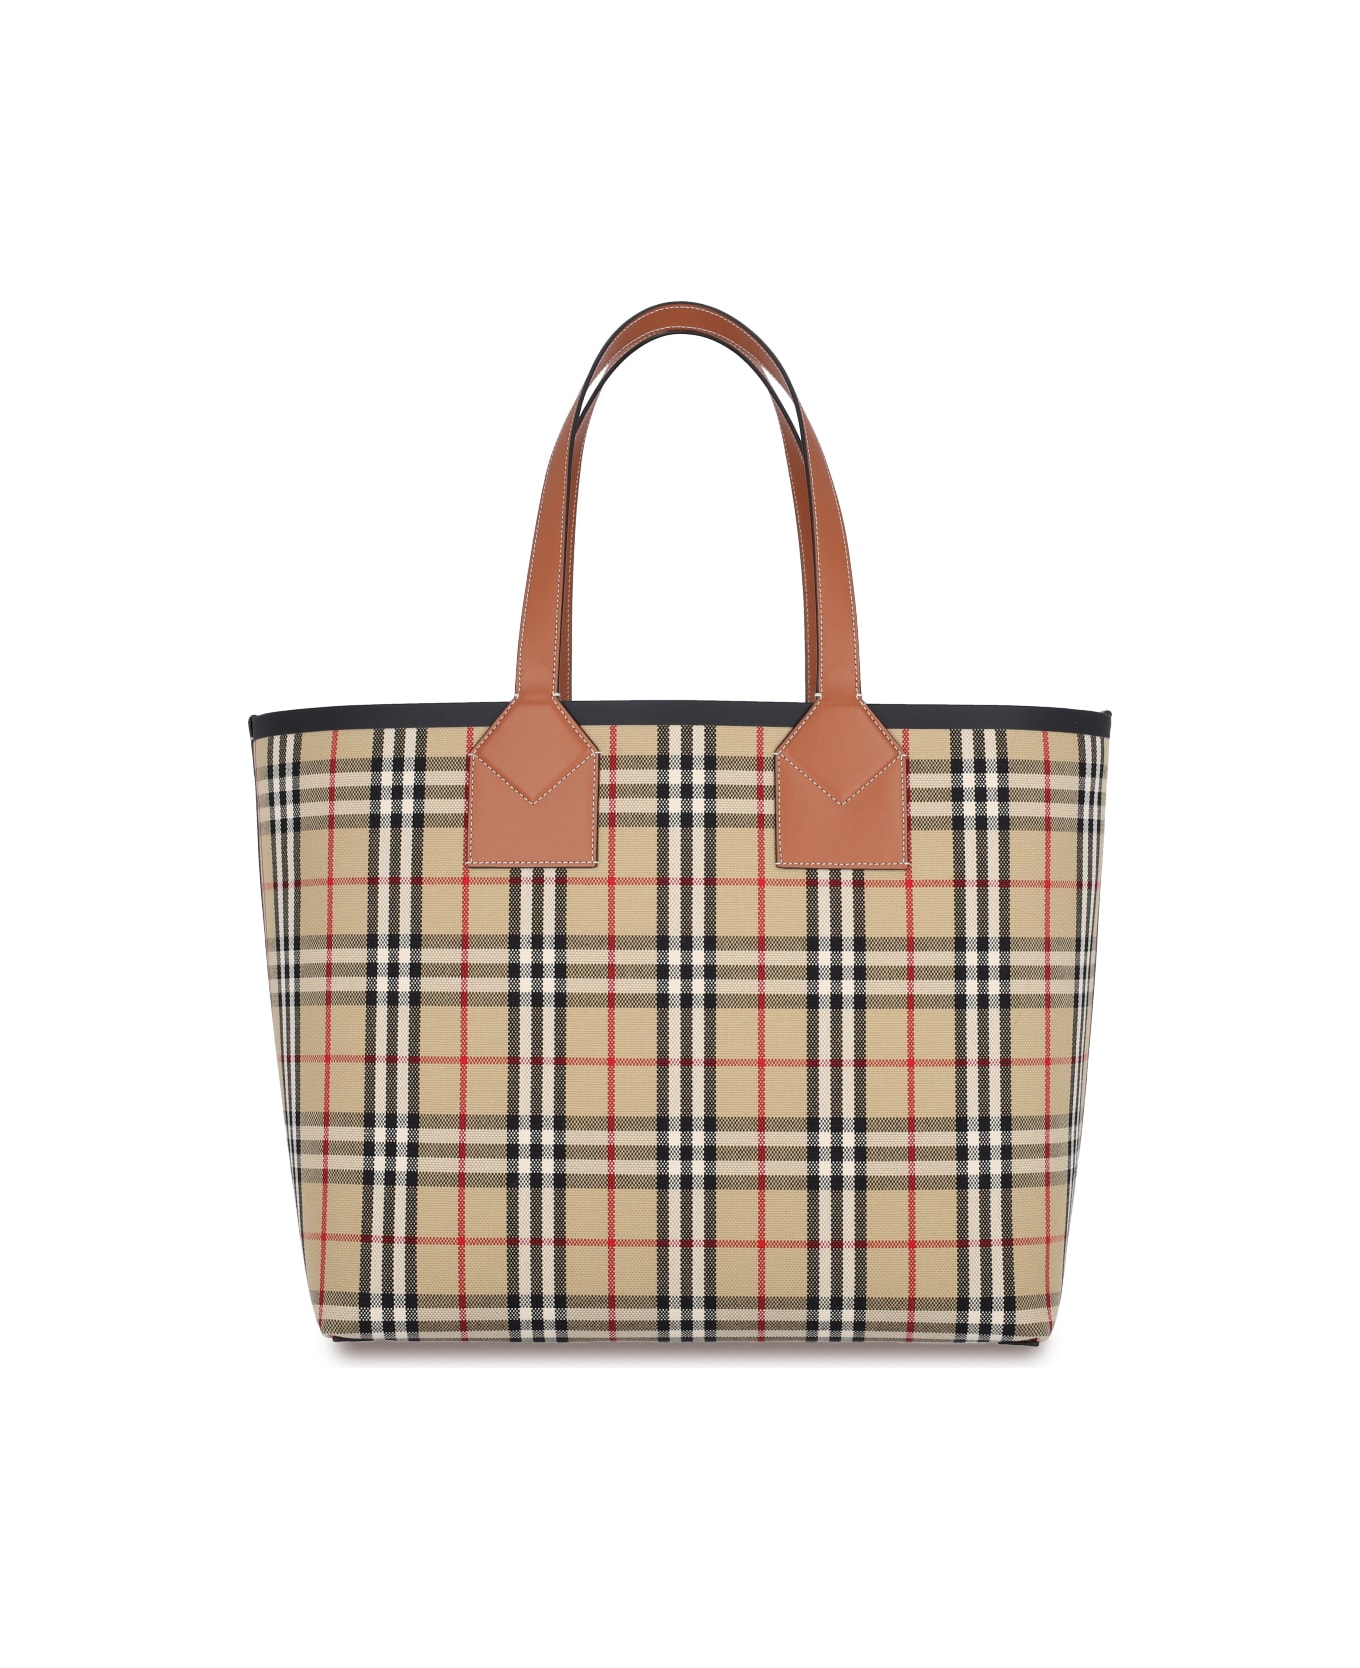 Burberry Large London Tote Bag - Brown トートバッグ